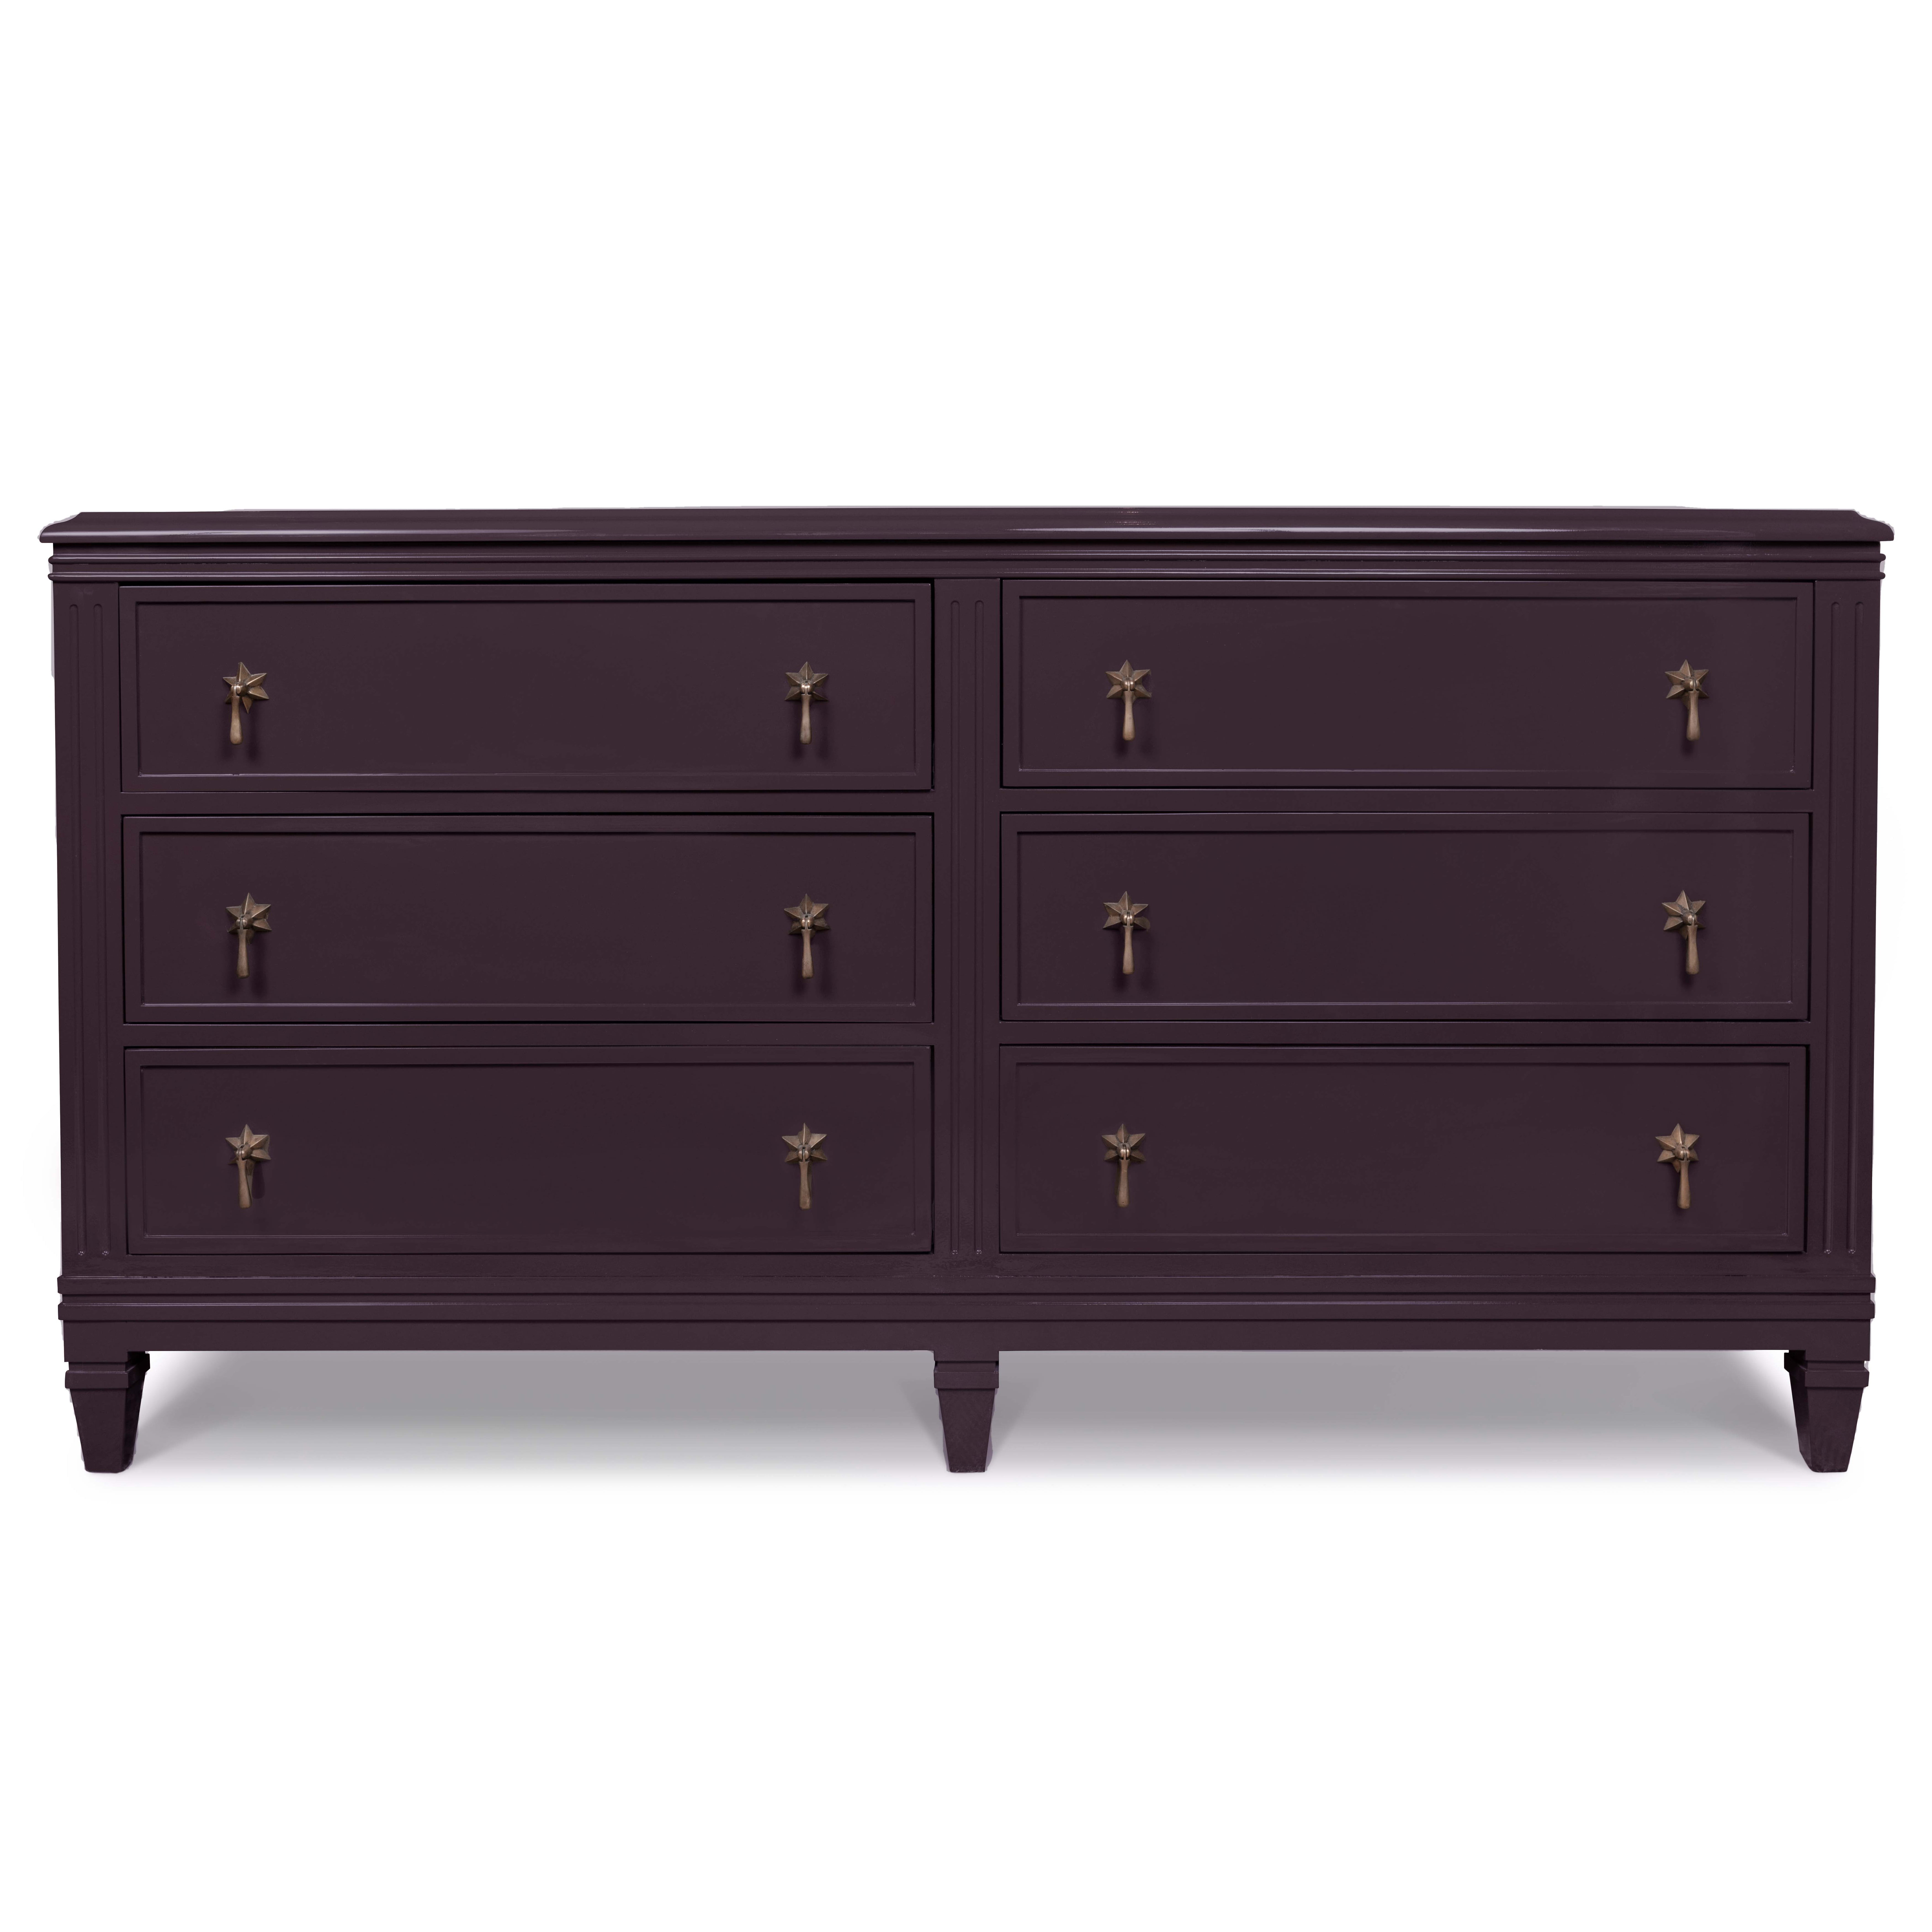 A dark purple-coloured large double chest of drawers with six drawers, each with two star-shaped pull handles.